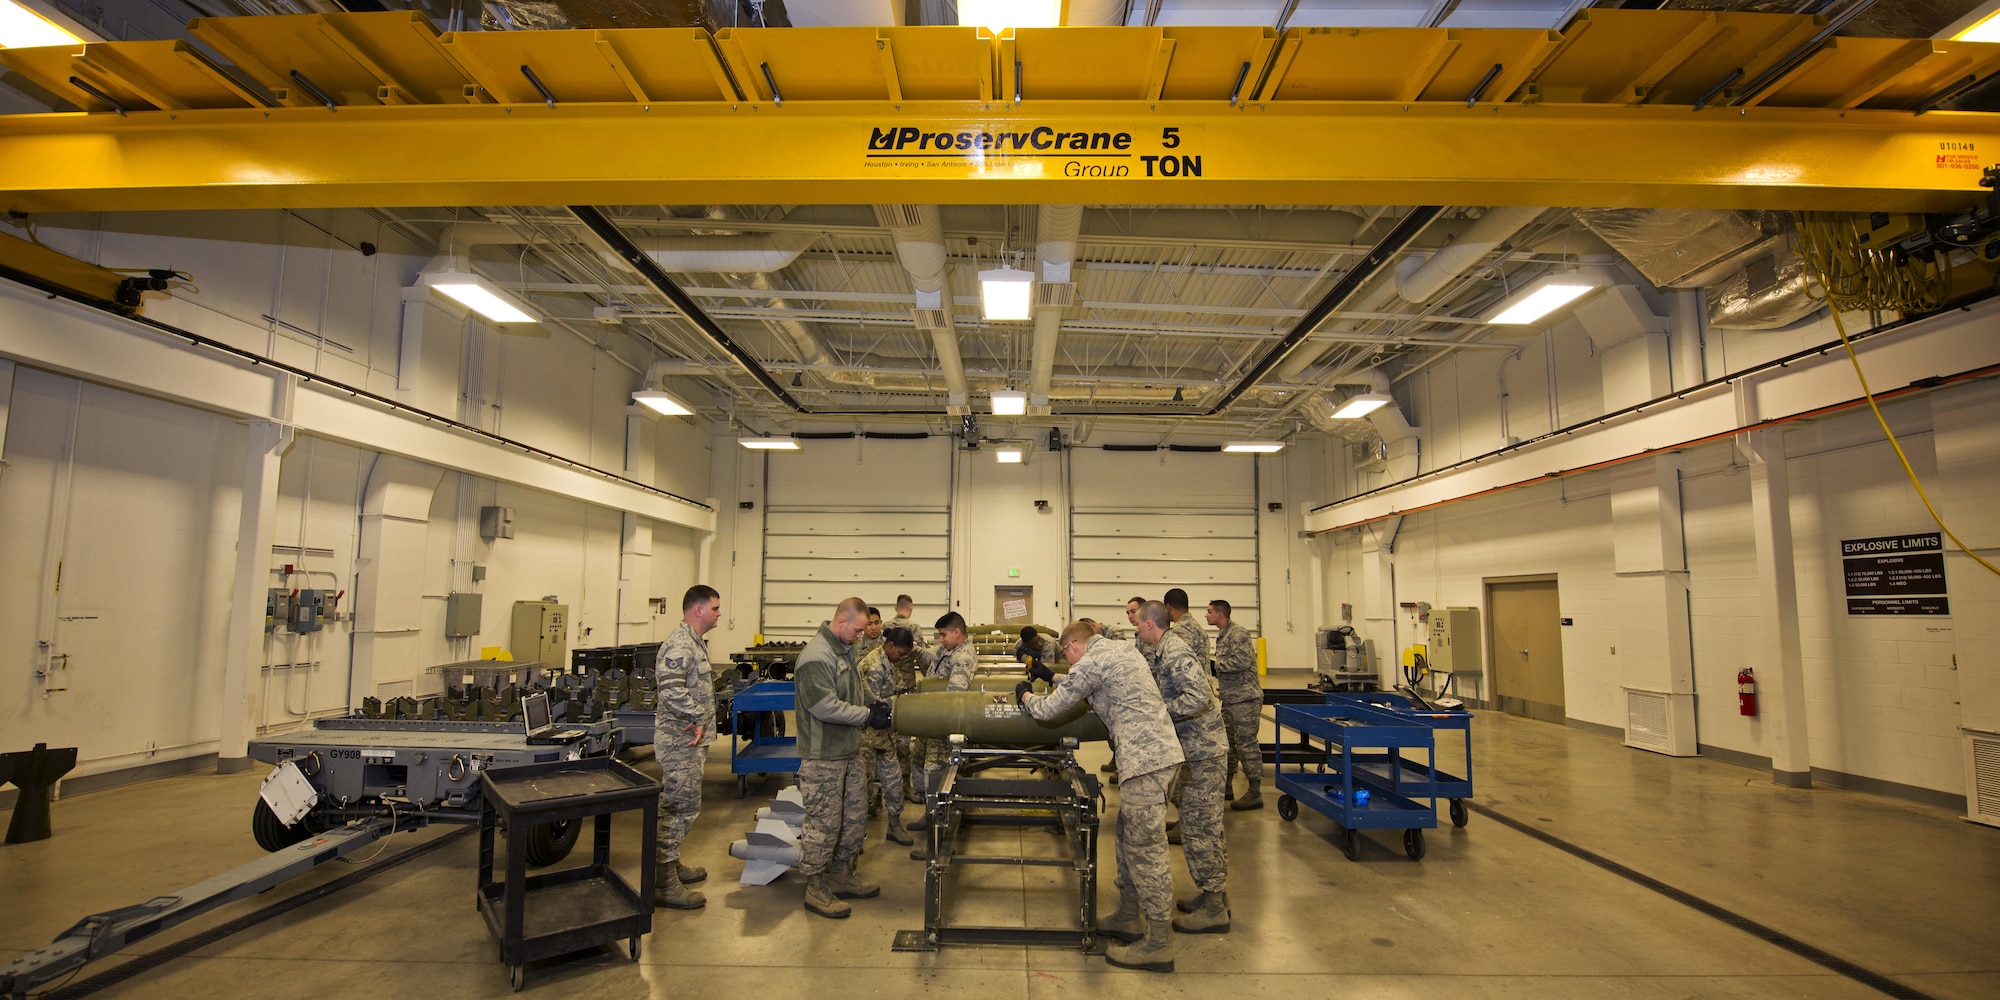 Airmen from the 5th Munitions Squadron assemble inert GBU-38s at Minot Air Force Base, N.D., Oct. 27, 2016. Airmen assembled four guided bomb units as a part of training for an upcoming deployment. (U.S. Air Force photo/Airman 1st Class J.T. Armstrong)